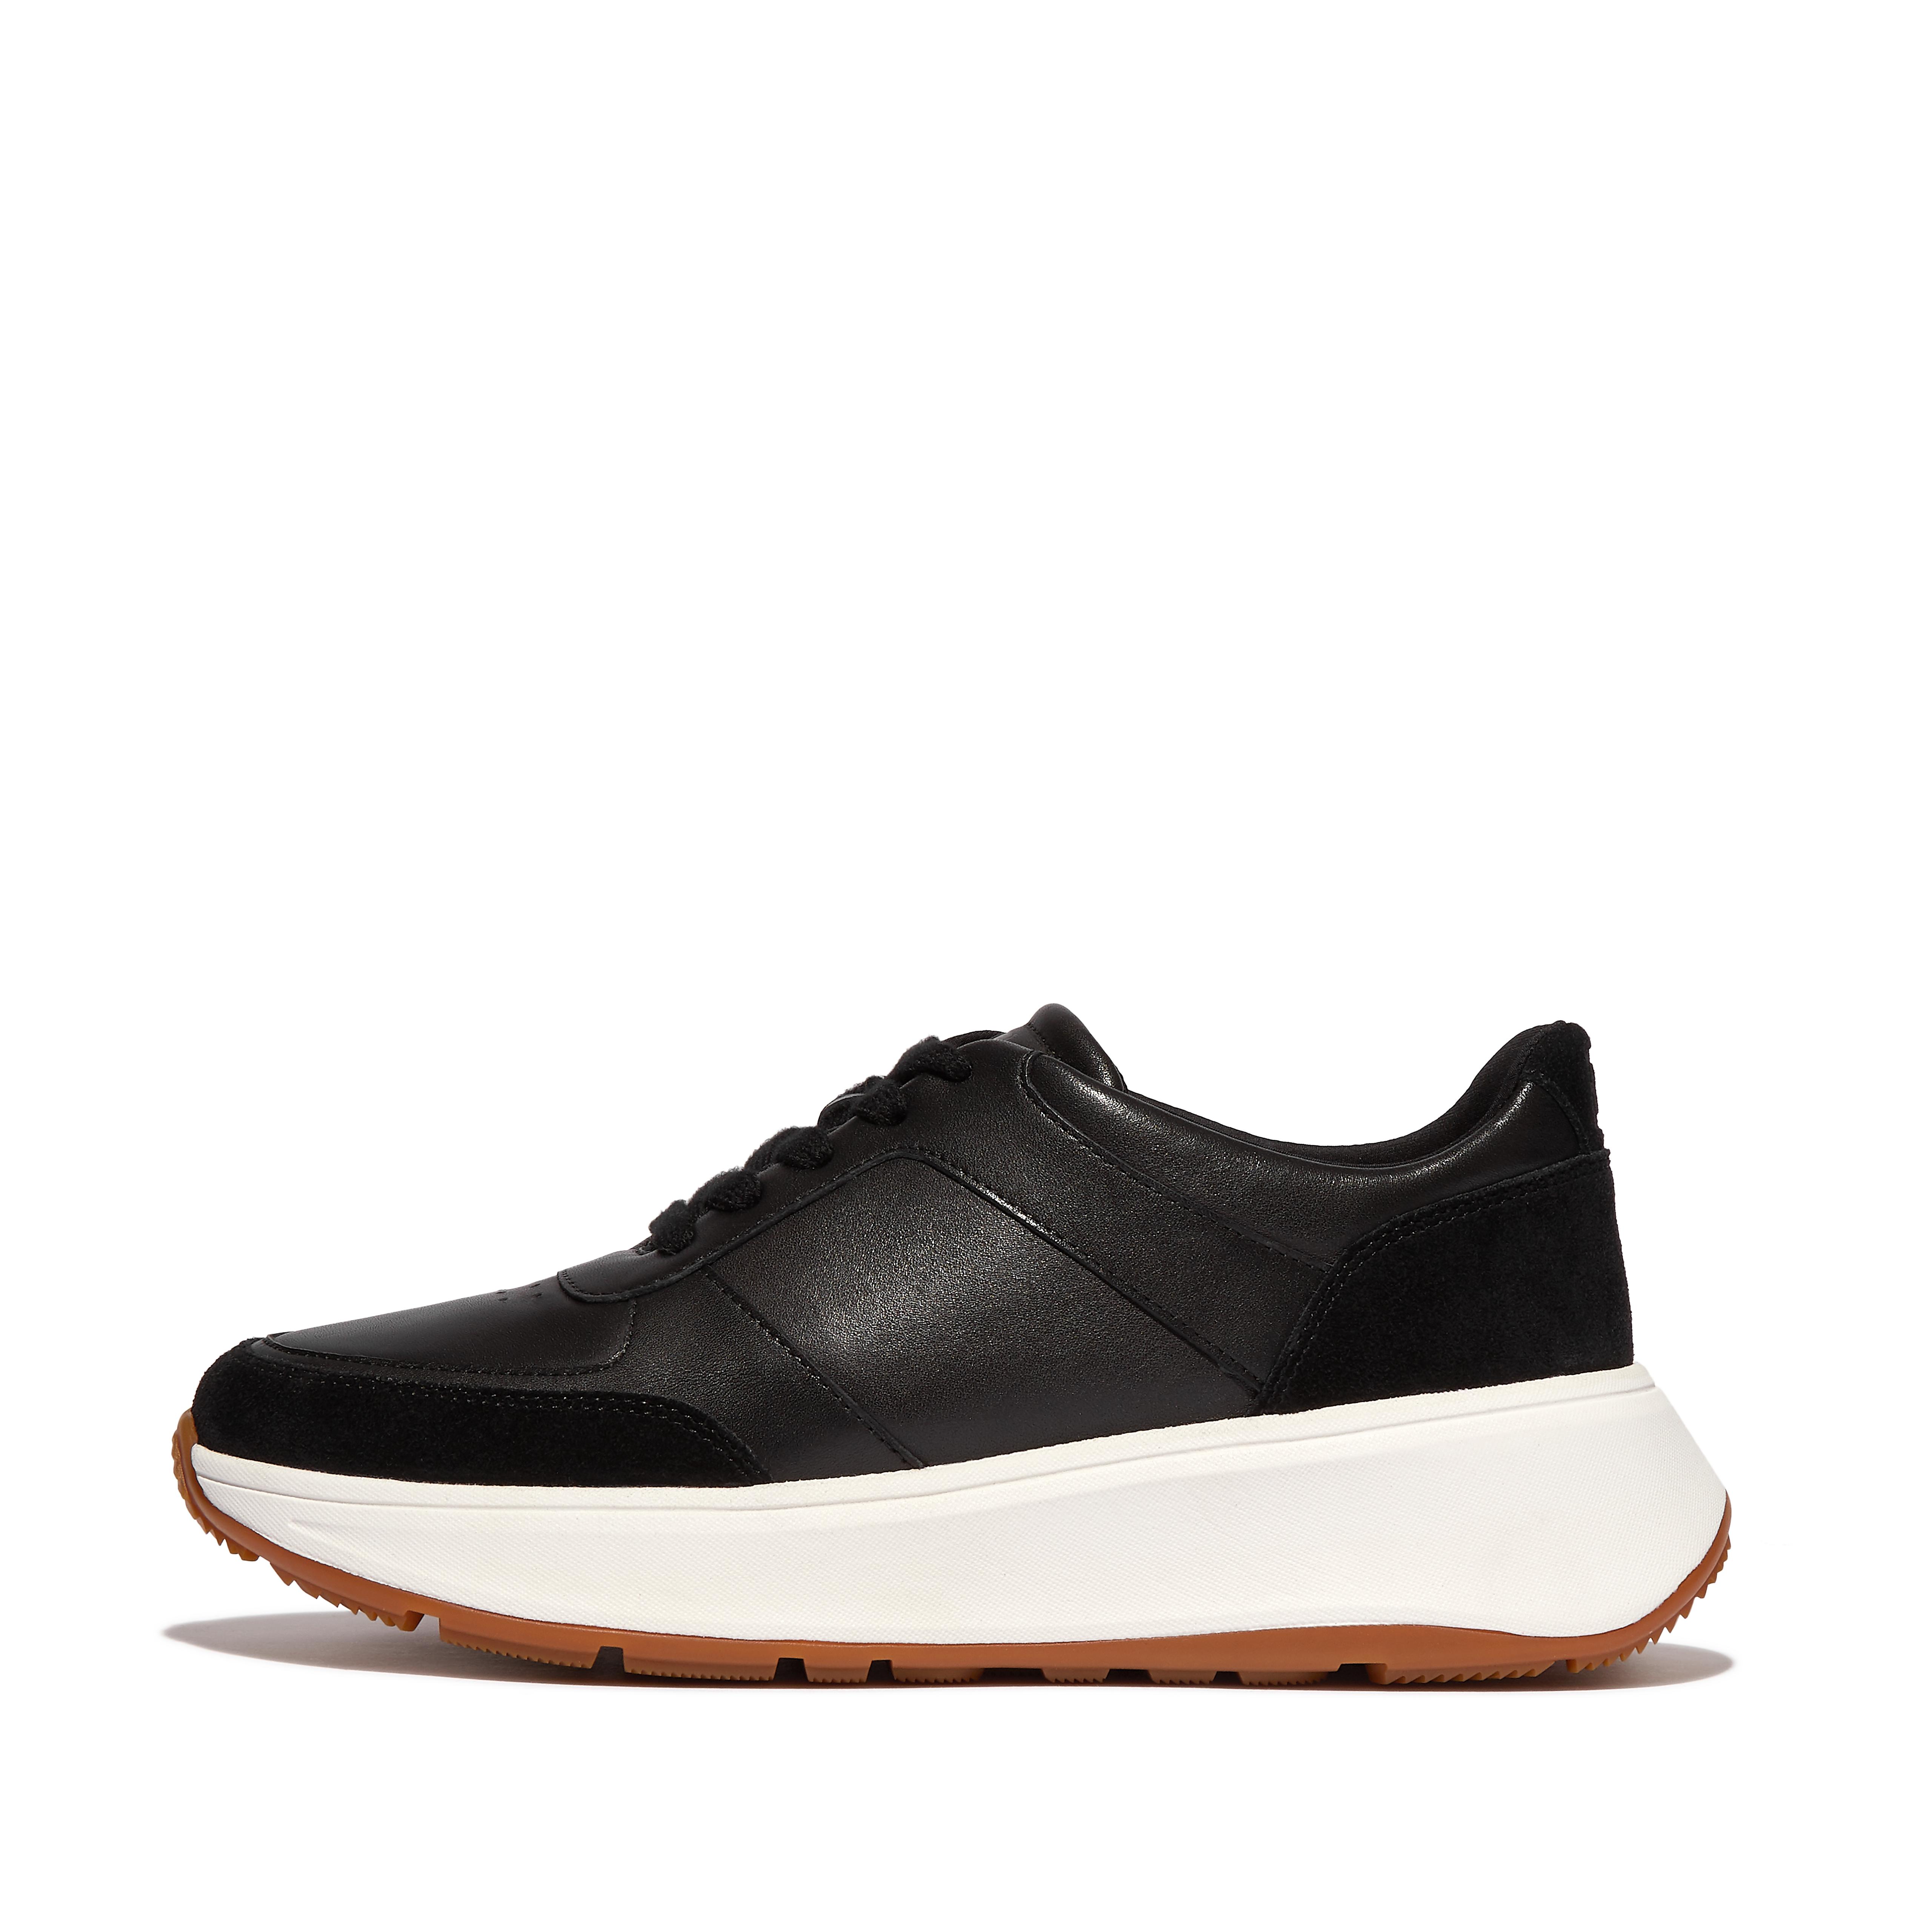 Fitflop Leather/Suede Flatform Sneakers